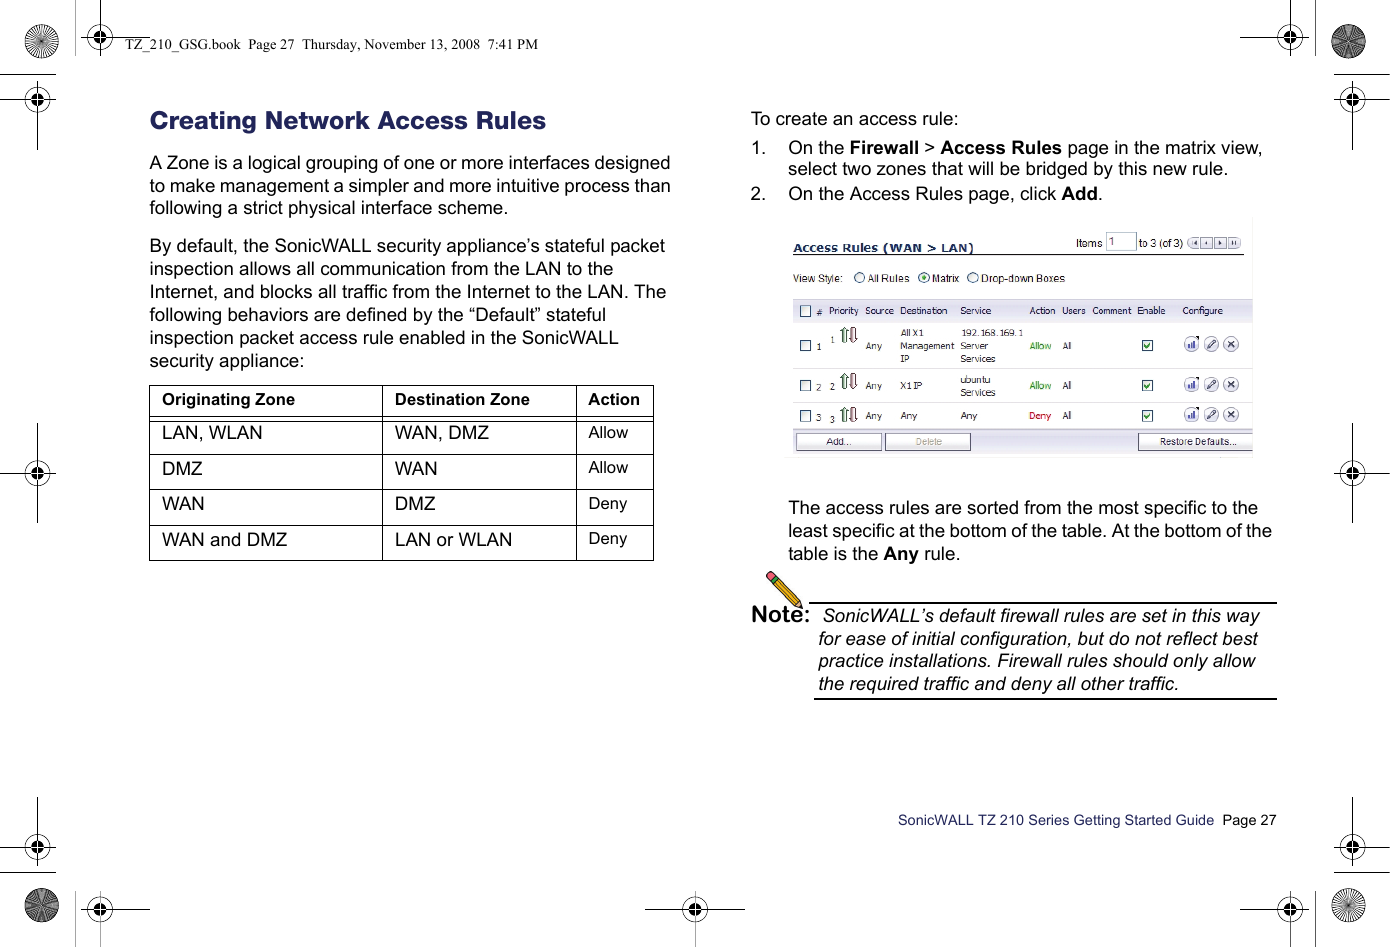 SonicWALL TZ 210 Series Getting Started Guide  Page 27Creating Network Access RulesA Zone is a logical grouping of one or more interfaces designed to make management a simpler and more intuitive process than following a strict physical interface scheme.By default, the SonicWALL security appliance’s stateful packet inspection allows all communication from the LAN to the Internet, and blocks all traffic from the Internet to the LAN. The following behaviors are defined by the “Default” stateful inspection packet access rule enabled in the SonicWALL security appliance: To create an access rule:1. On the Firewall &gt; Access Rules page in the matrix view, select two zones that will be bridged by this new rule.2. On the Access Rules page, click Add. The access rules are sorted from the most specific to the least specific at the bottom of the table. At the bottom of the table is the Any rule. Note: SonicWALL’s default firewall rules are set in this way for ease of initial configuration, but do not reflect best practice installations. Firewall rules should only allow the required traffic and deny all other traffic. Originating Zone Destination Zone ActionLAN, WLAN WAN, DMZ AllowDMZ WAN AllowWAN DMZ  DenyWAN and DMZ  LAN or WLAN DenyTZ_210_GSG.book  Page 27  Thursday, November 13, 2008  7:41 PM